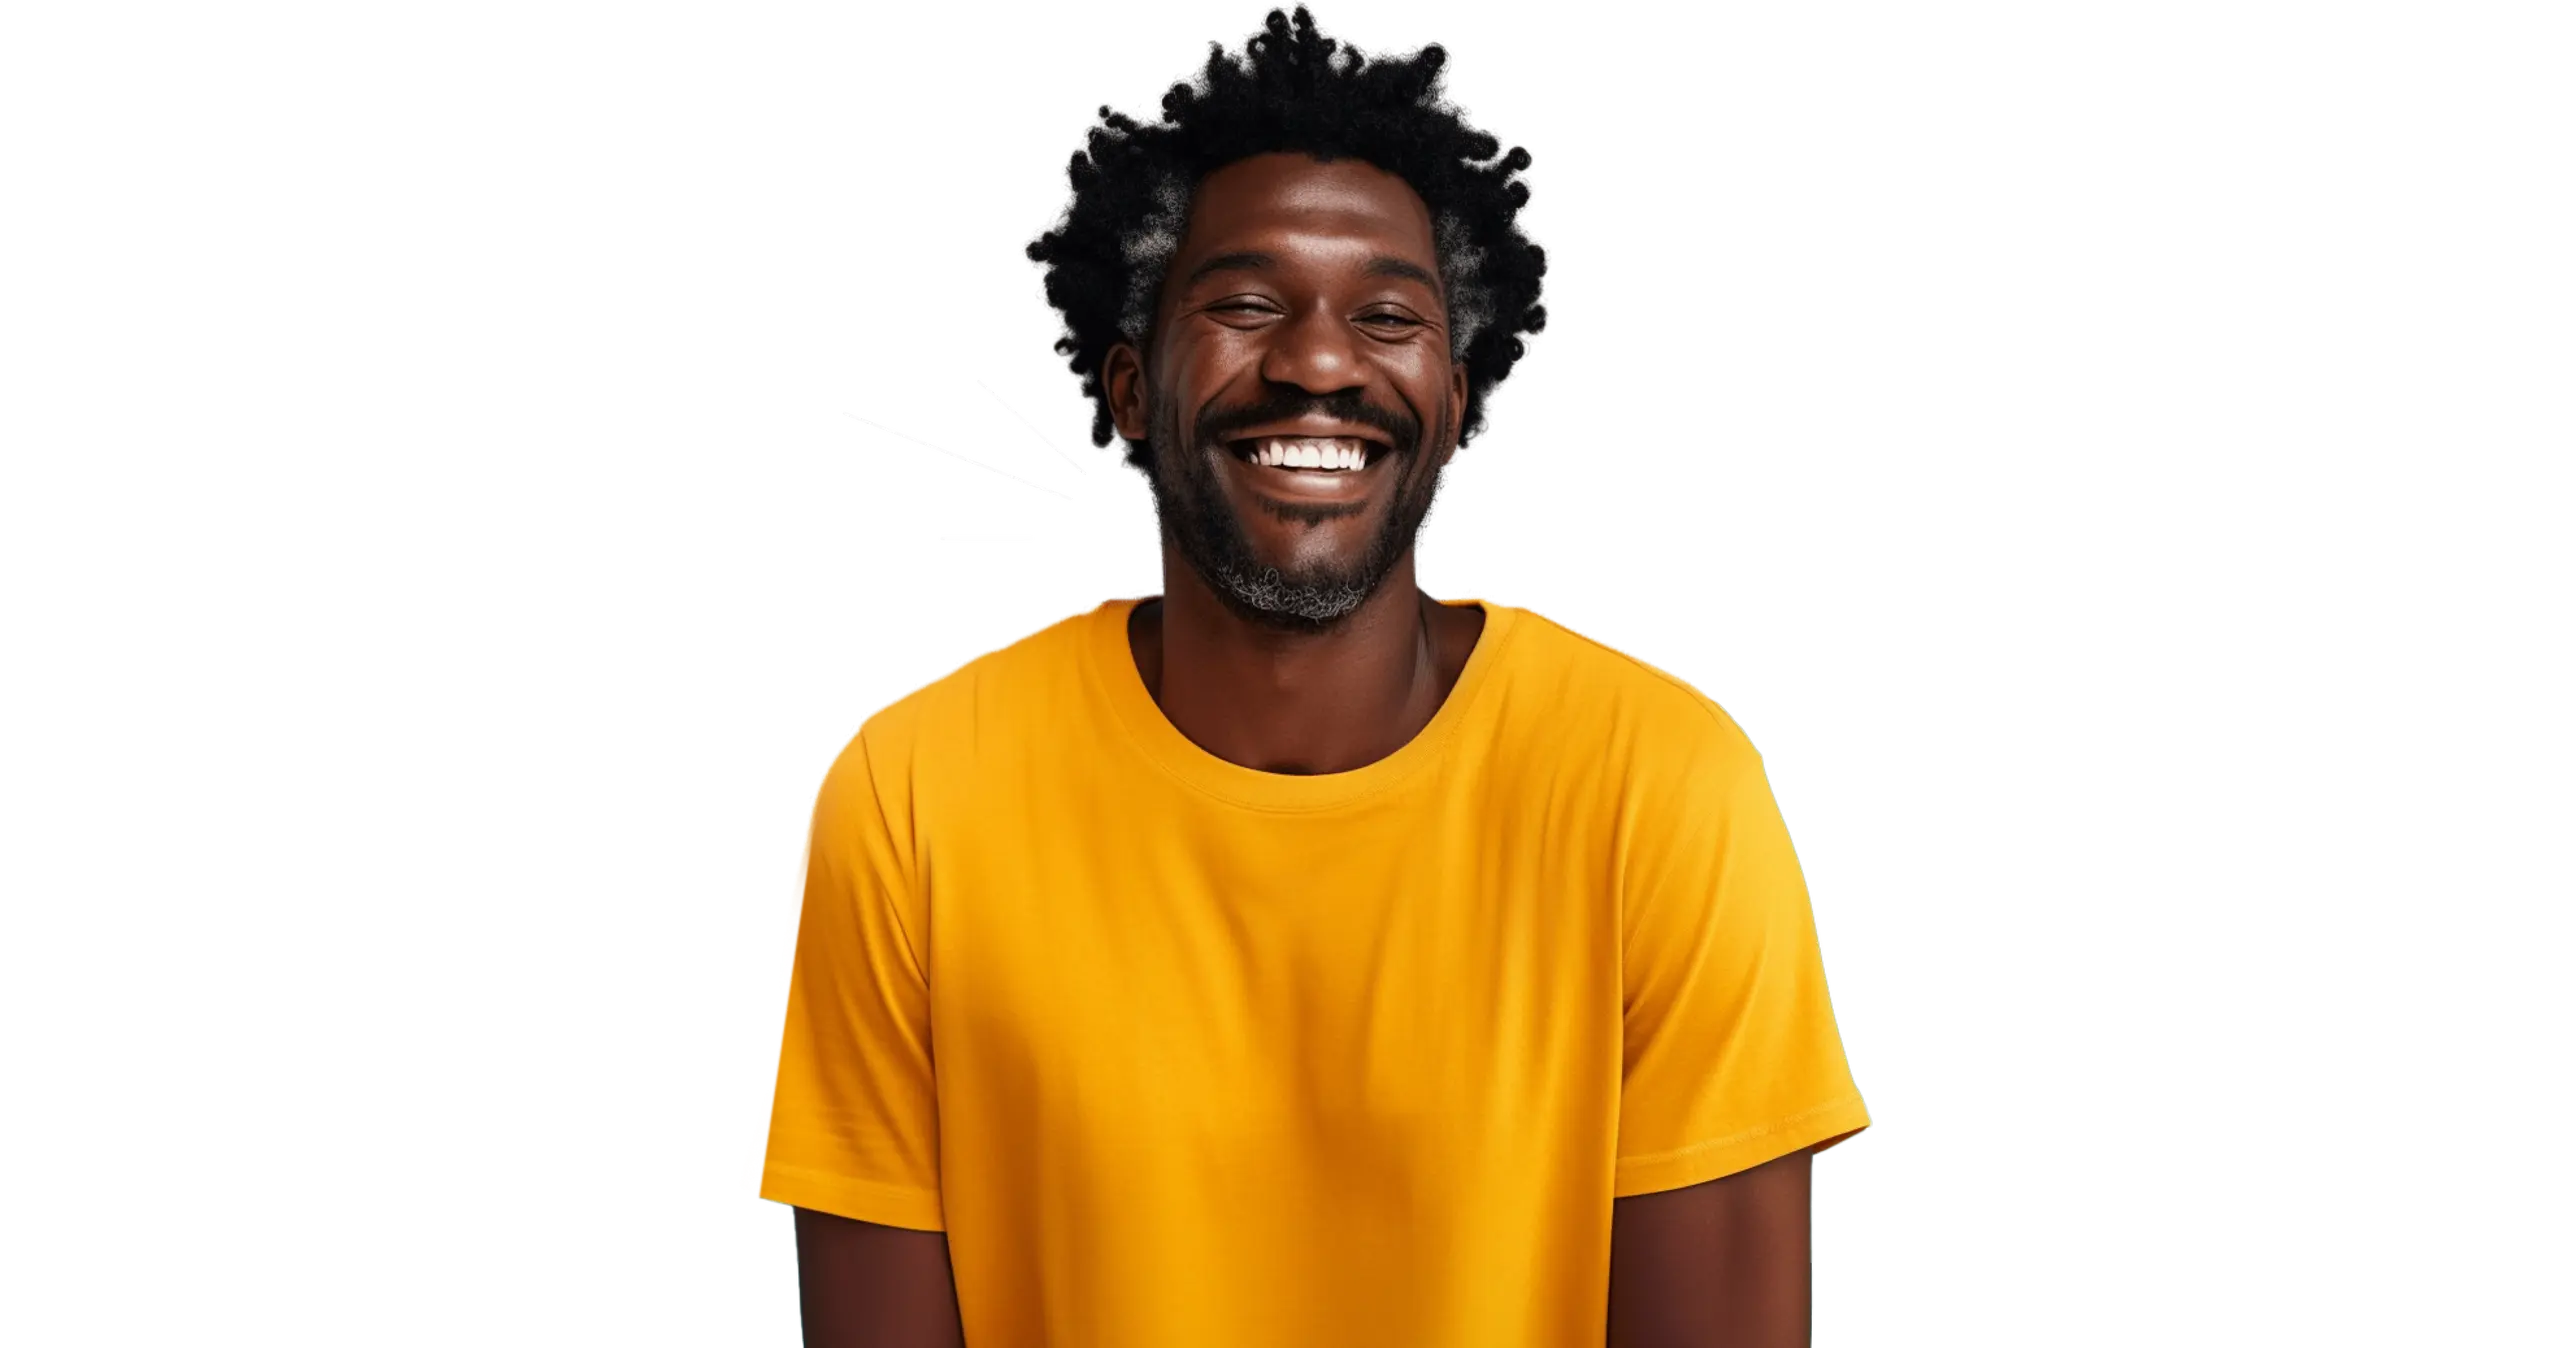 A smiling man in a yellow T-shirt.